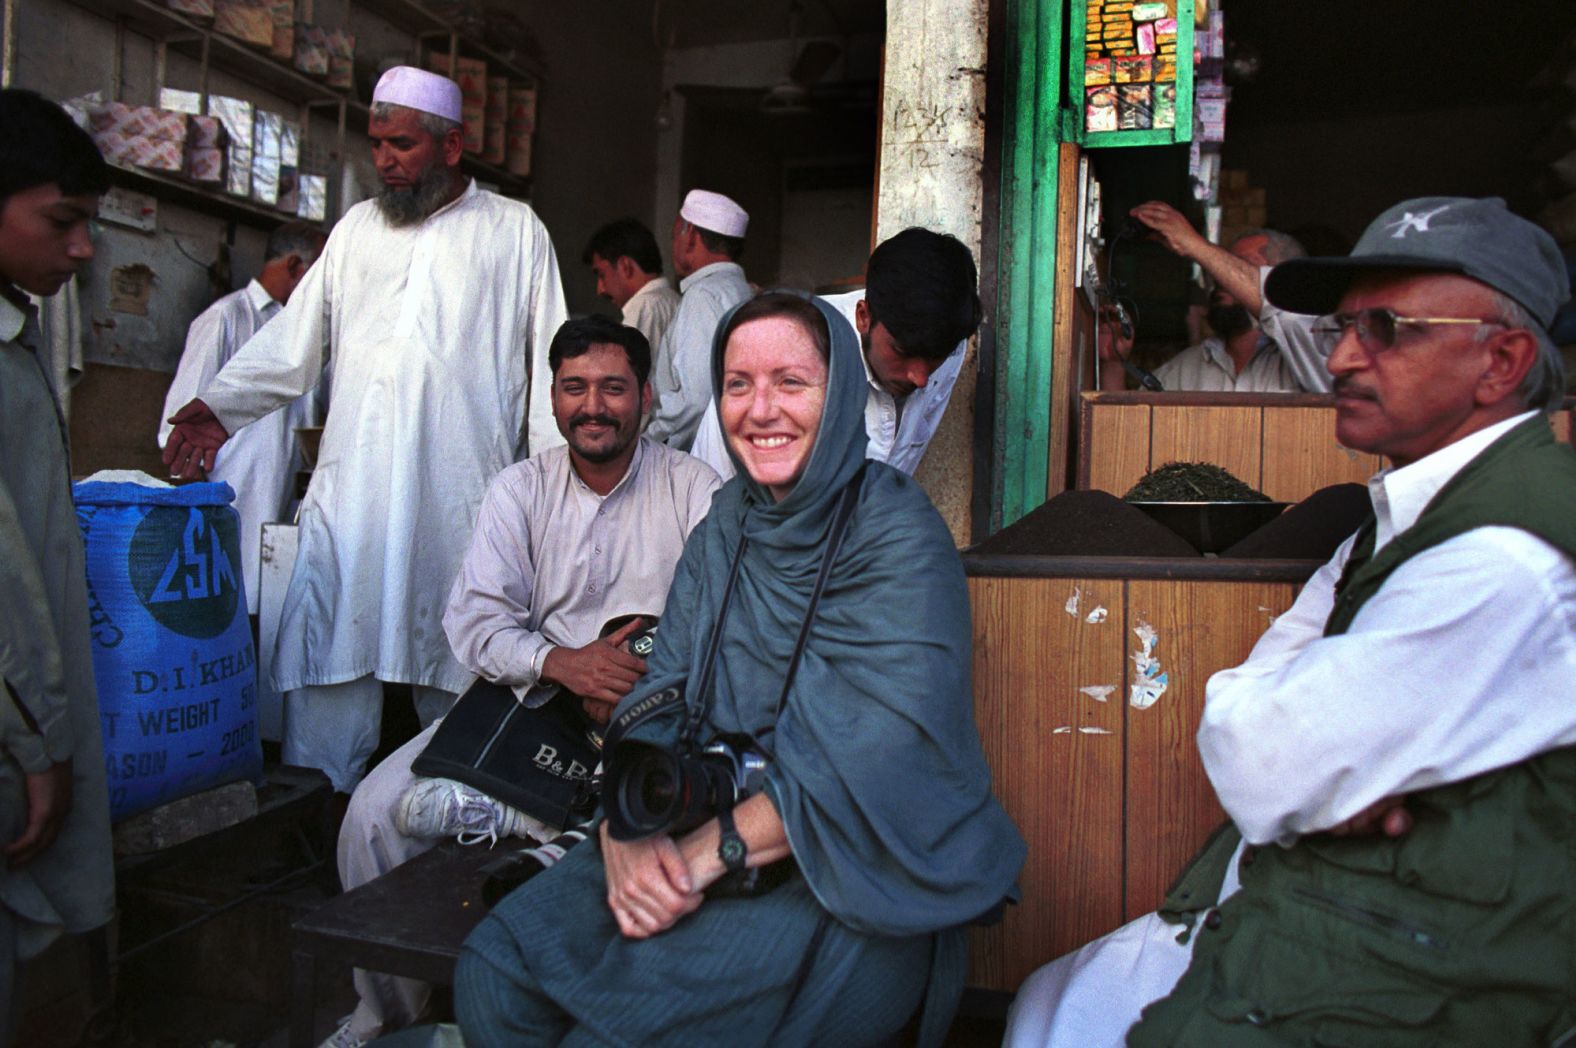 <a href="index.php?page=&url=https%3A%2F%2Fwww.nytimes.com%2Fby%2Fruth-fremson" target="_blank" target="_blank">Ruth Fremson</a>, a staff photographer for The New York Times, works in Pakistan in 2001. She has covered many international news stories during her career, including the war in Iraq and the second intifada in the Middle East. She also covered the 9/11 attacks and their aftermath in Pakistan and Afghanistan. She has won two Pulitzer Prizes and is now based in Seattle, where she covers the Pacific Northwest as well as national stories.